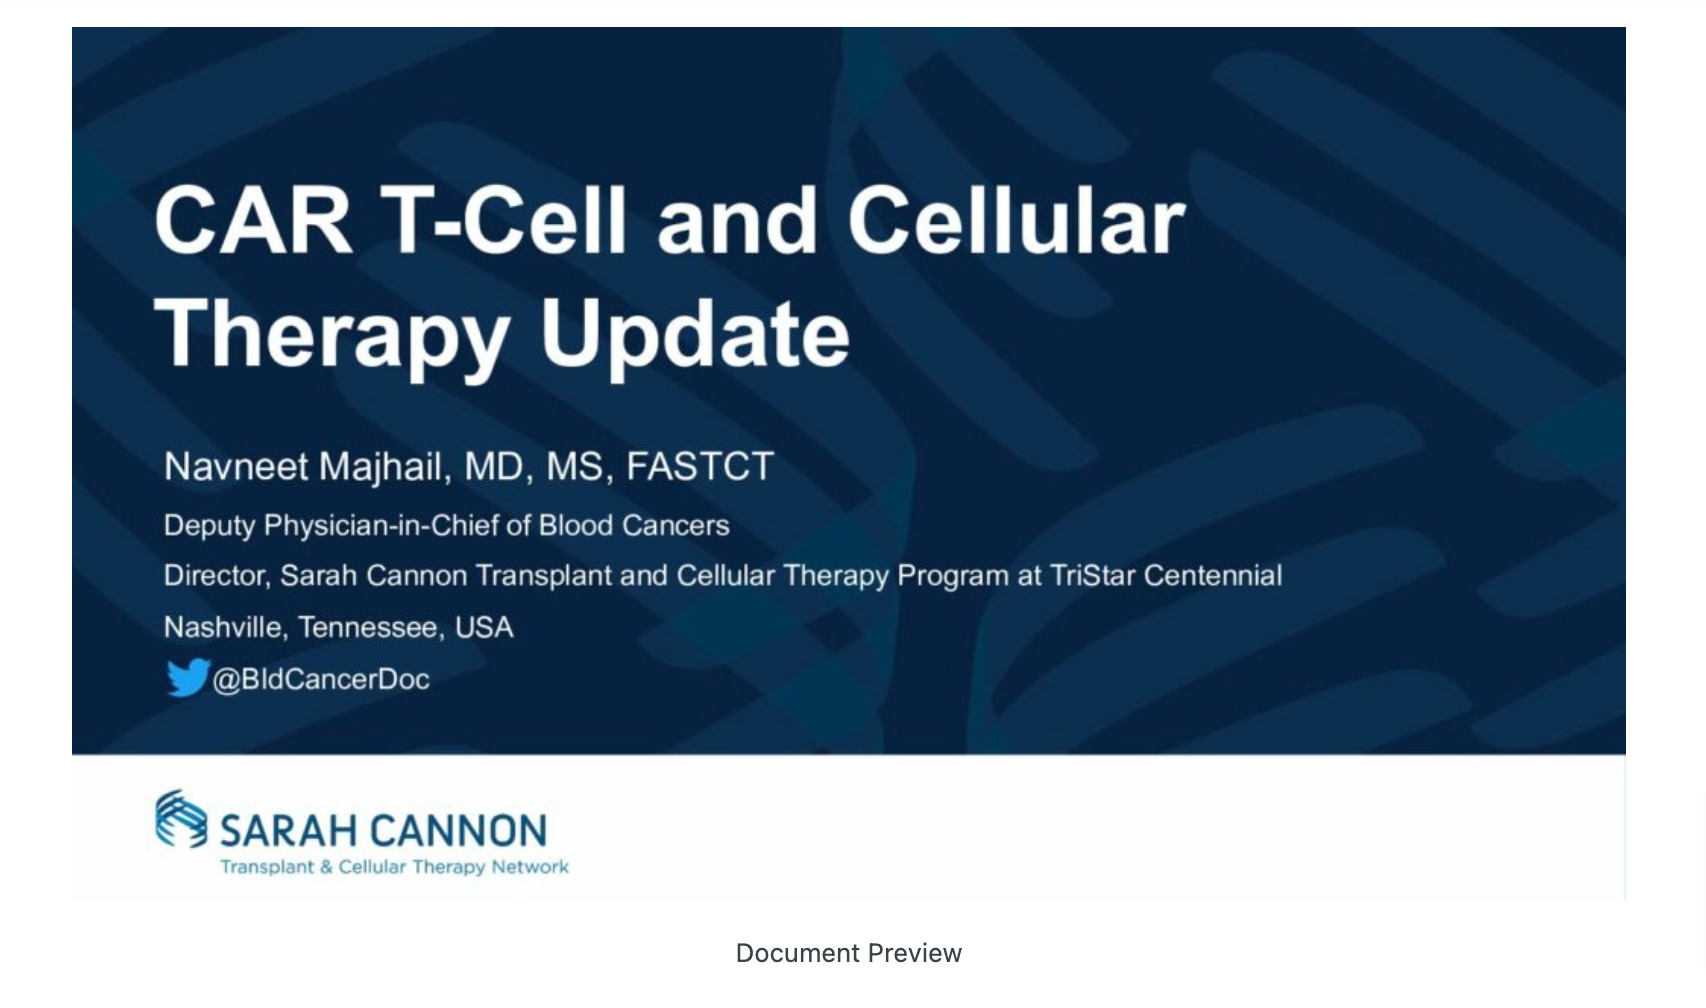 Keynote Lecture: CAR-T Cell and Cellular Therapy Update